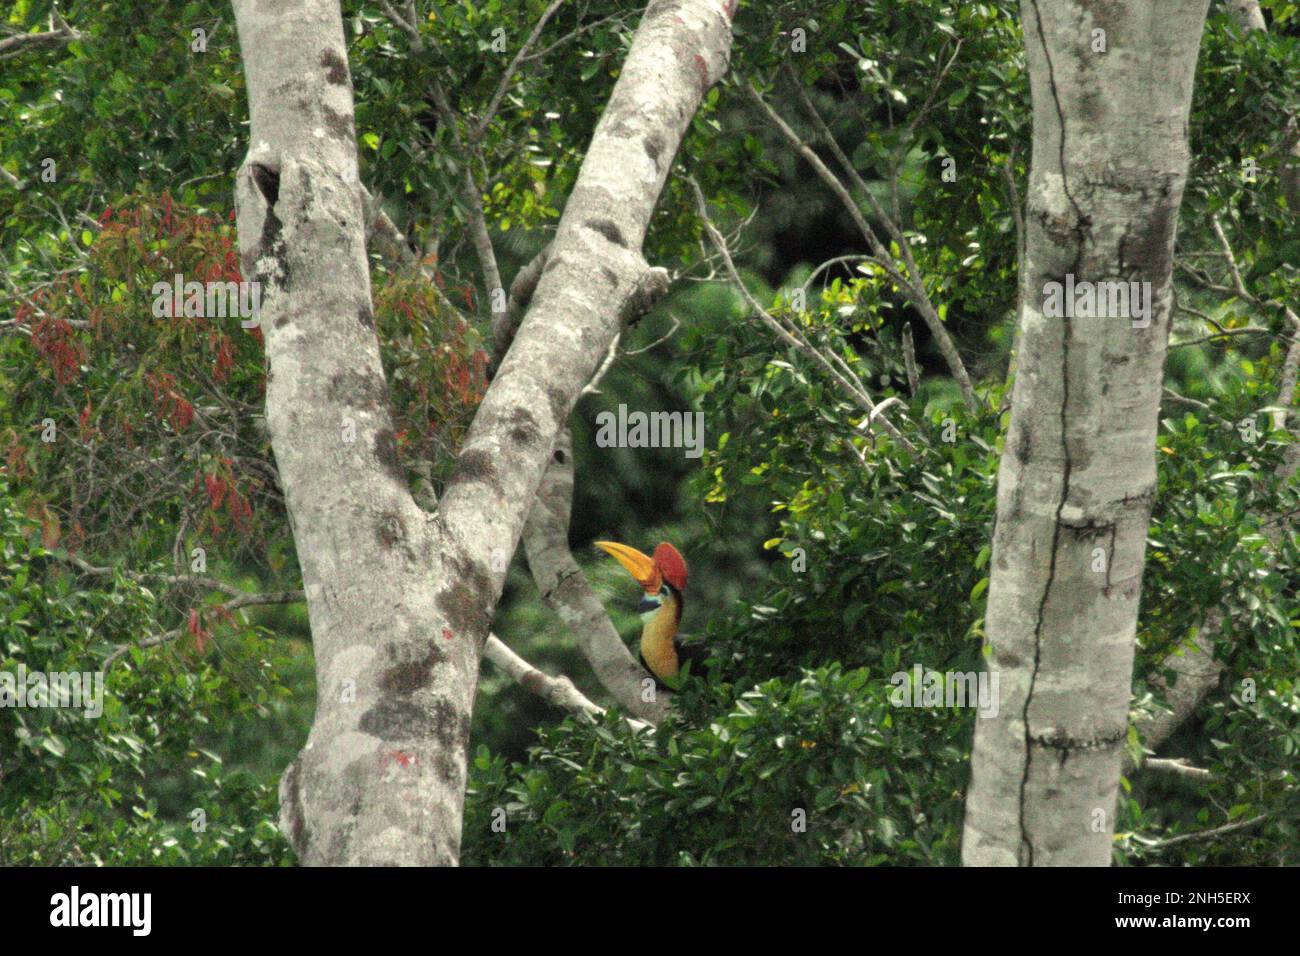 A male individual of knobbed hornbill, or sometimes called Sulawesi wrinkled hornbill (Rhyticeros cassidix), is foraging on a tree in a rainforest area near Mount Tangkoko and Duasudara in Bitung, North Sulawesi, Indonesia. Due to their dependency on forest and certain types of trees, hornbills in general are threatened by climate change. Stock Photo